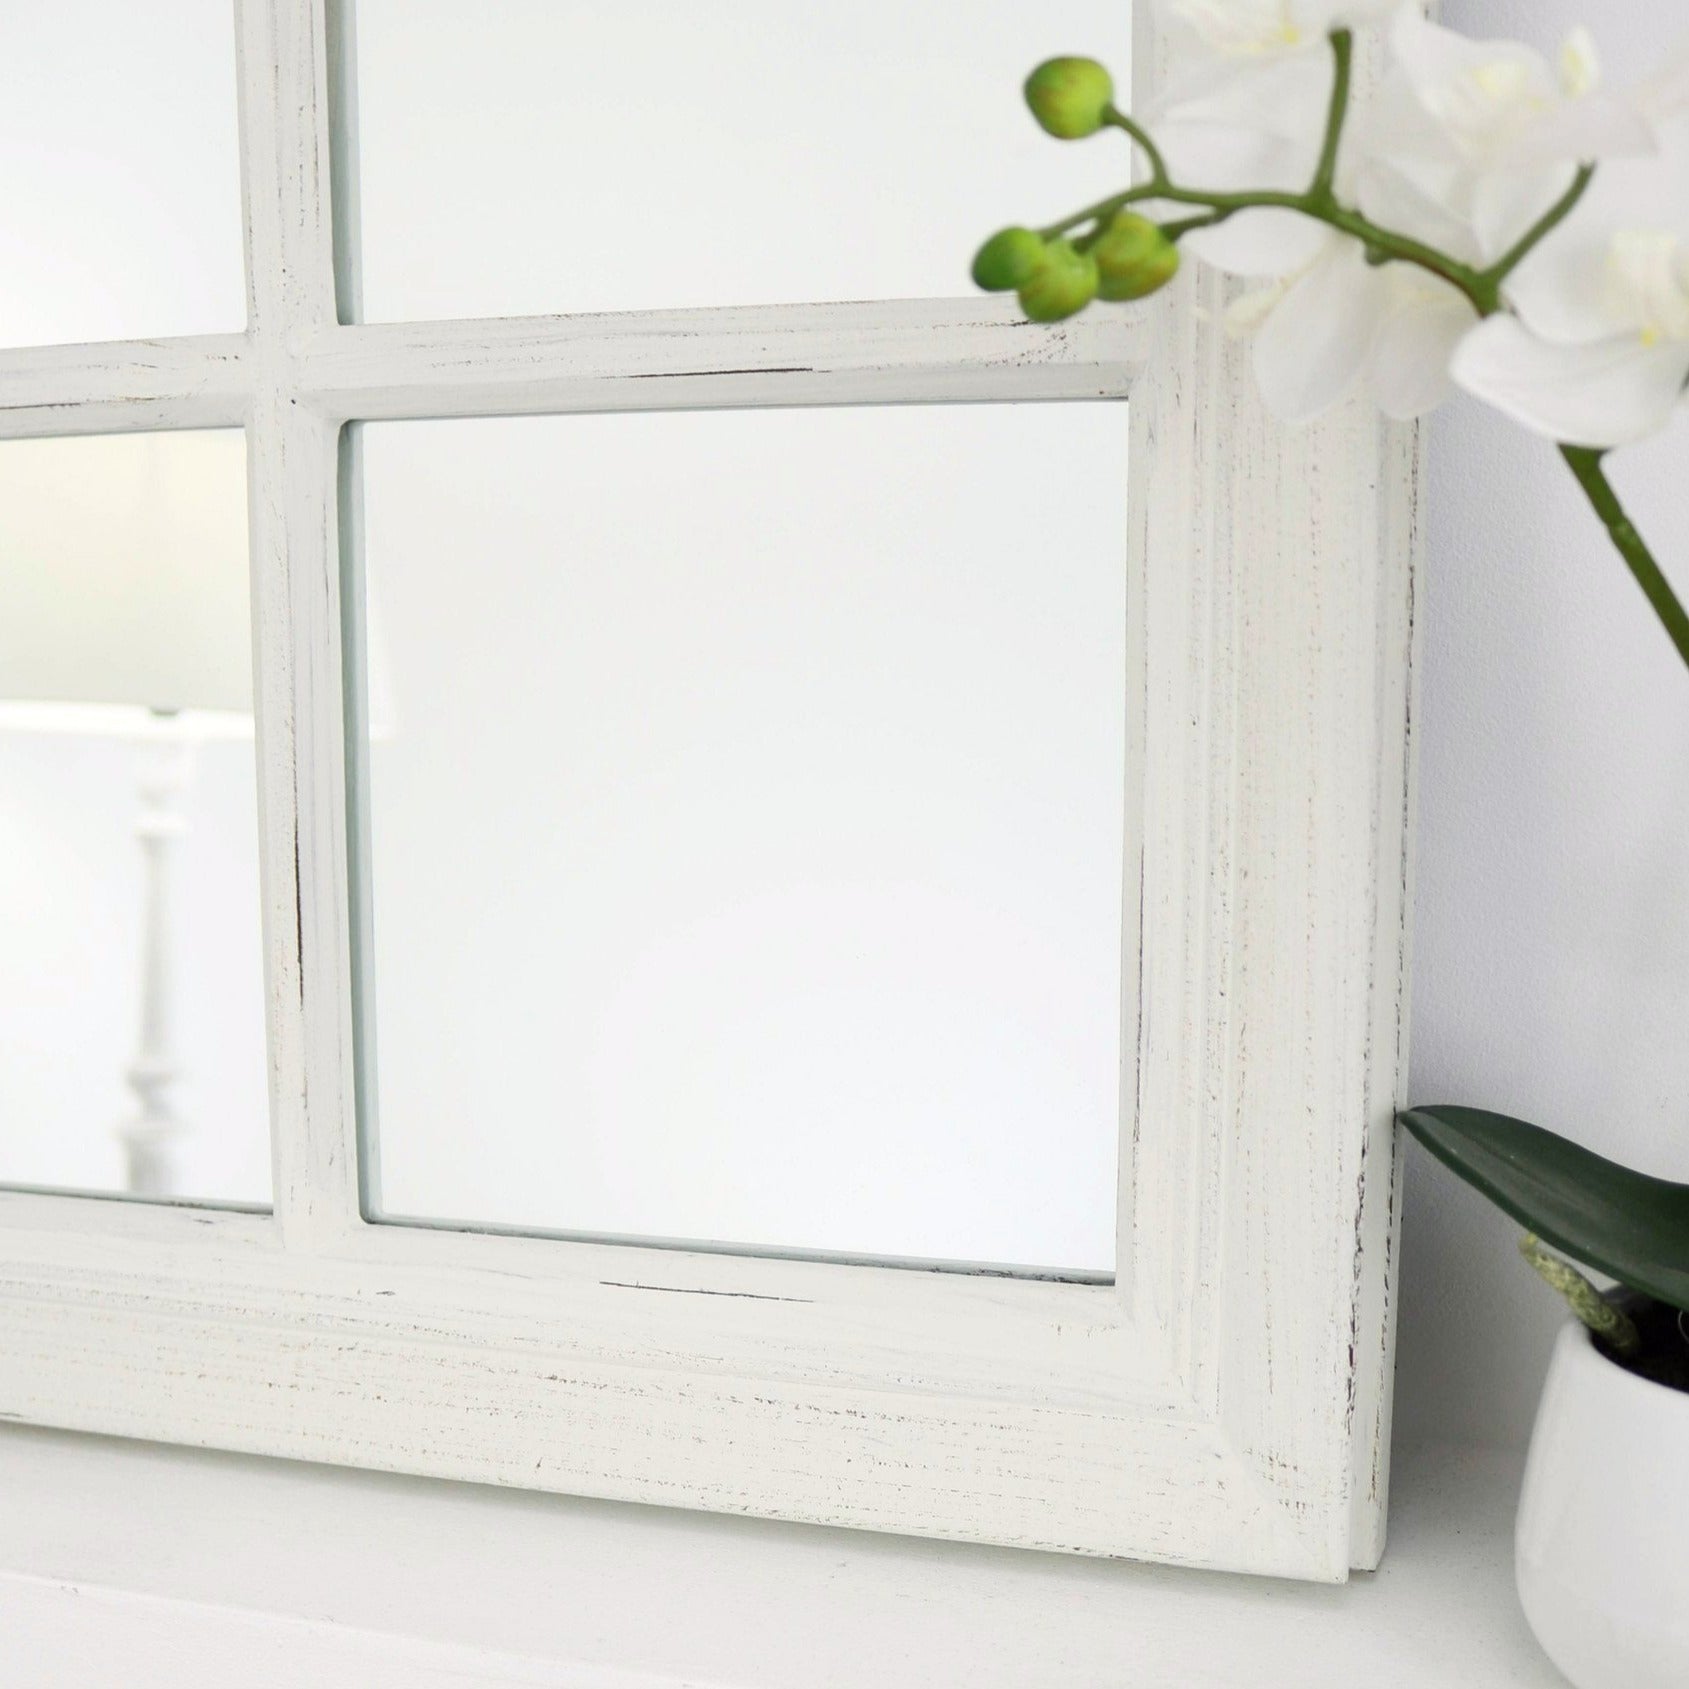 The classic detailing of this mirrors frame.